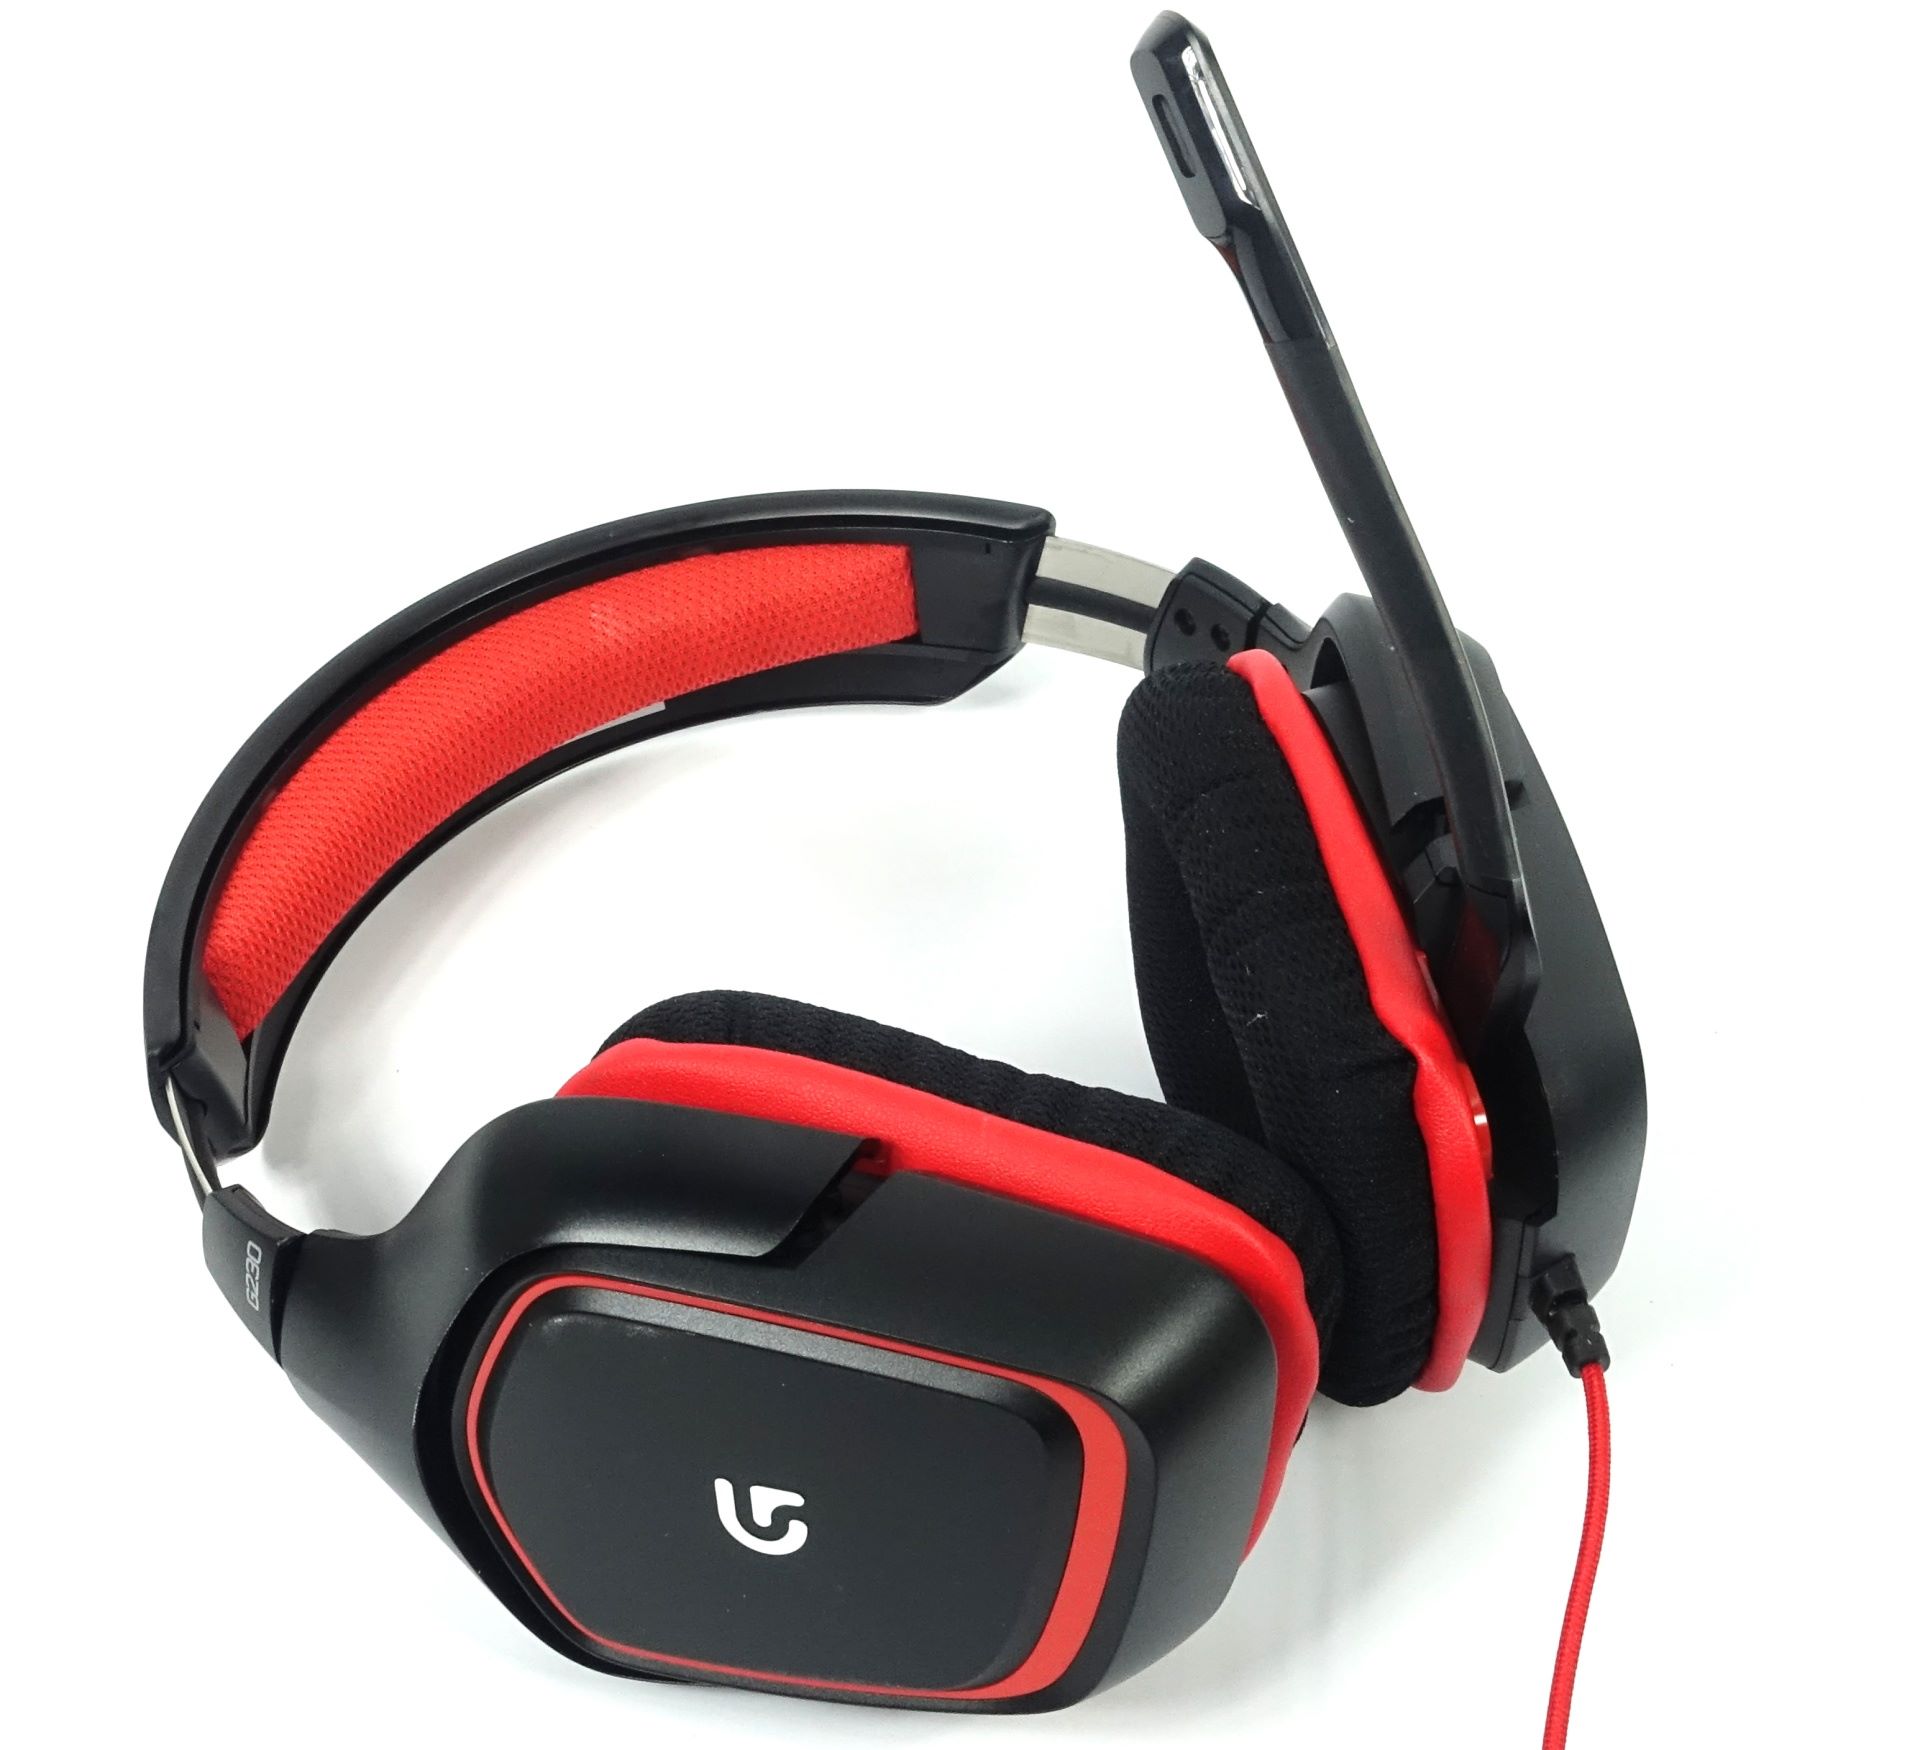 logitech-g230-stereo-gaming-headset-how-to-use-with-ps4